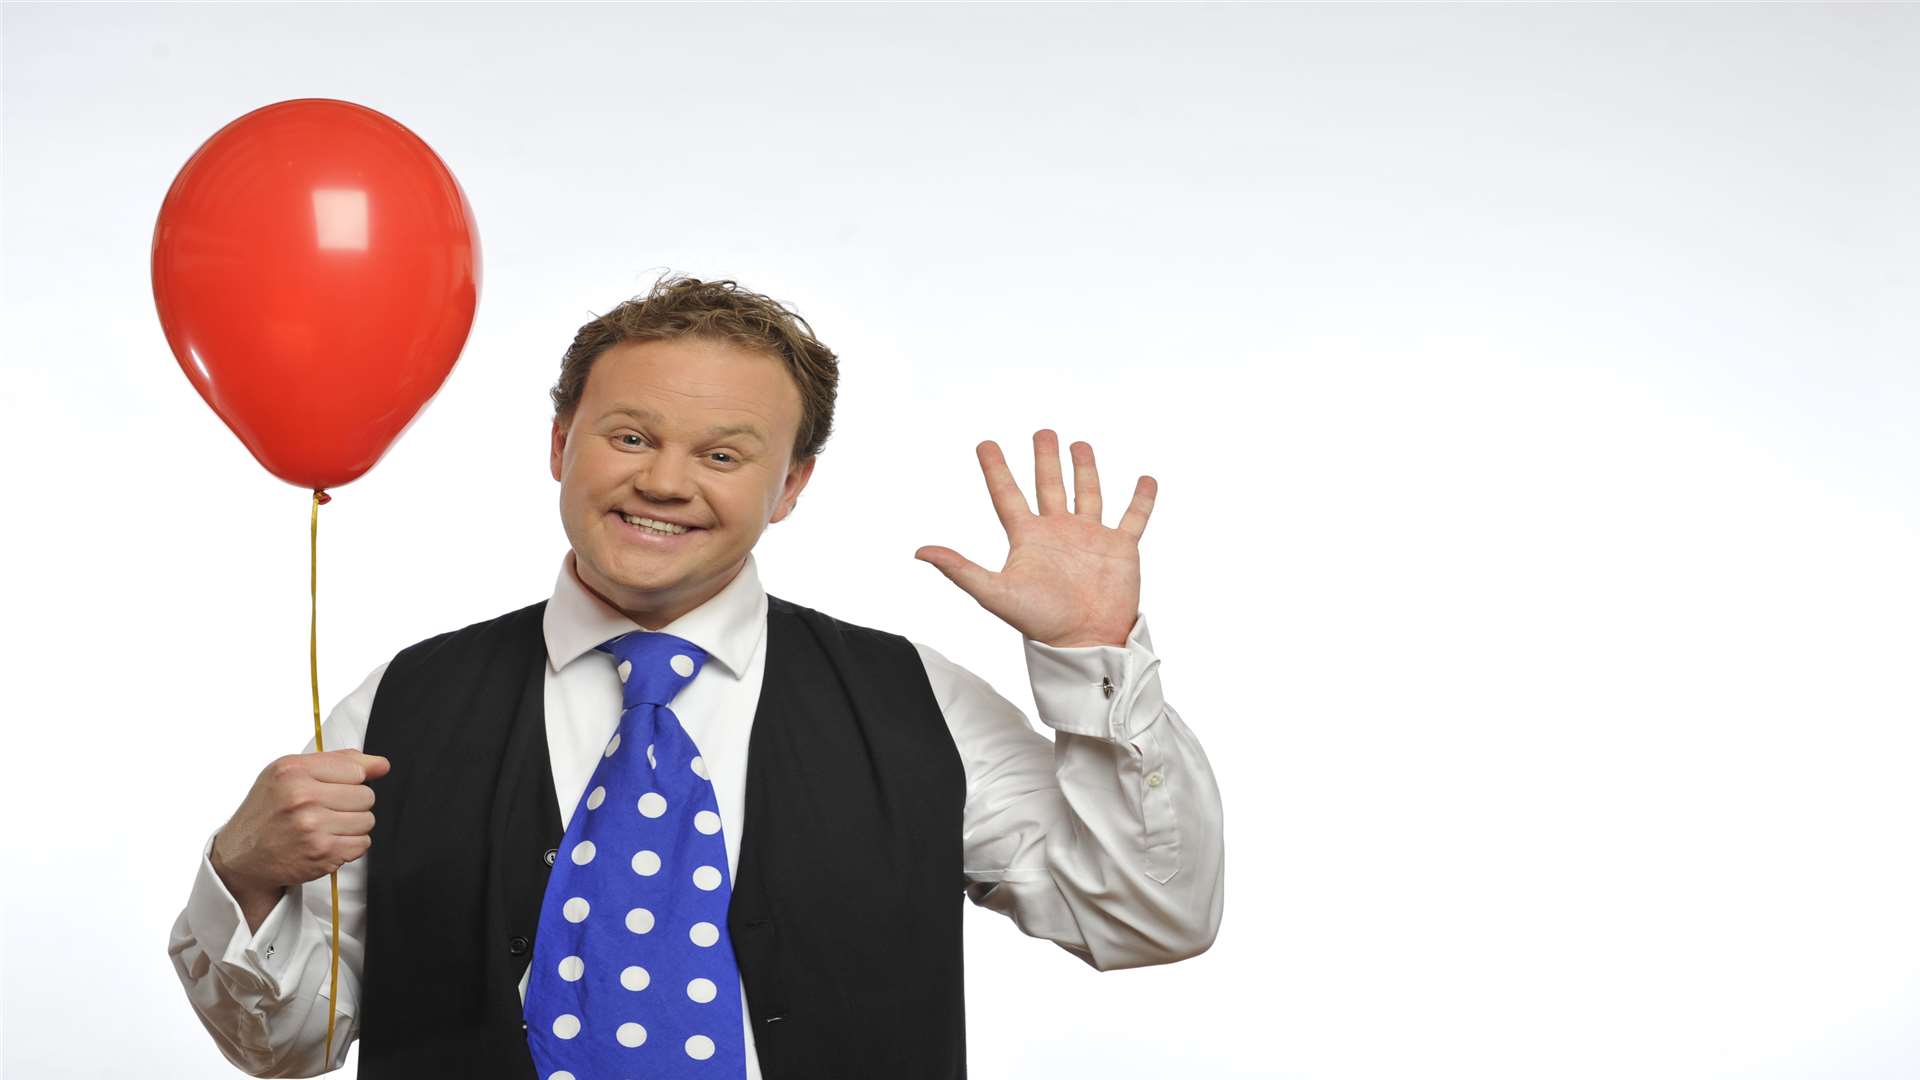 Justin Fletcher is appearing at Bluewater